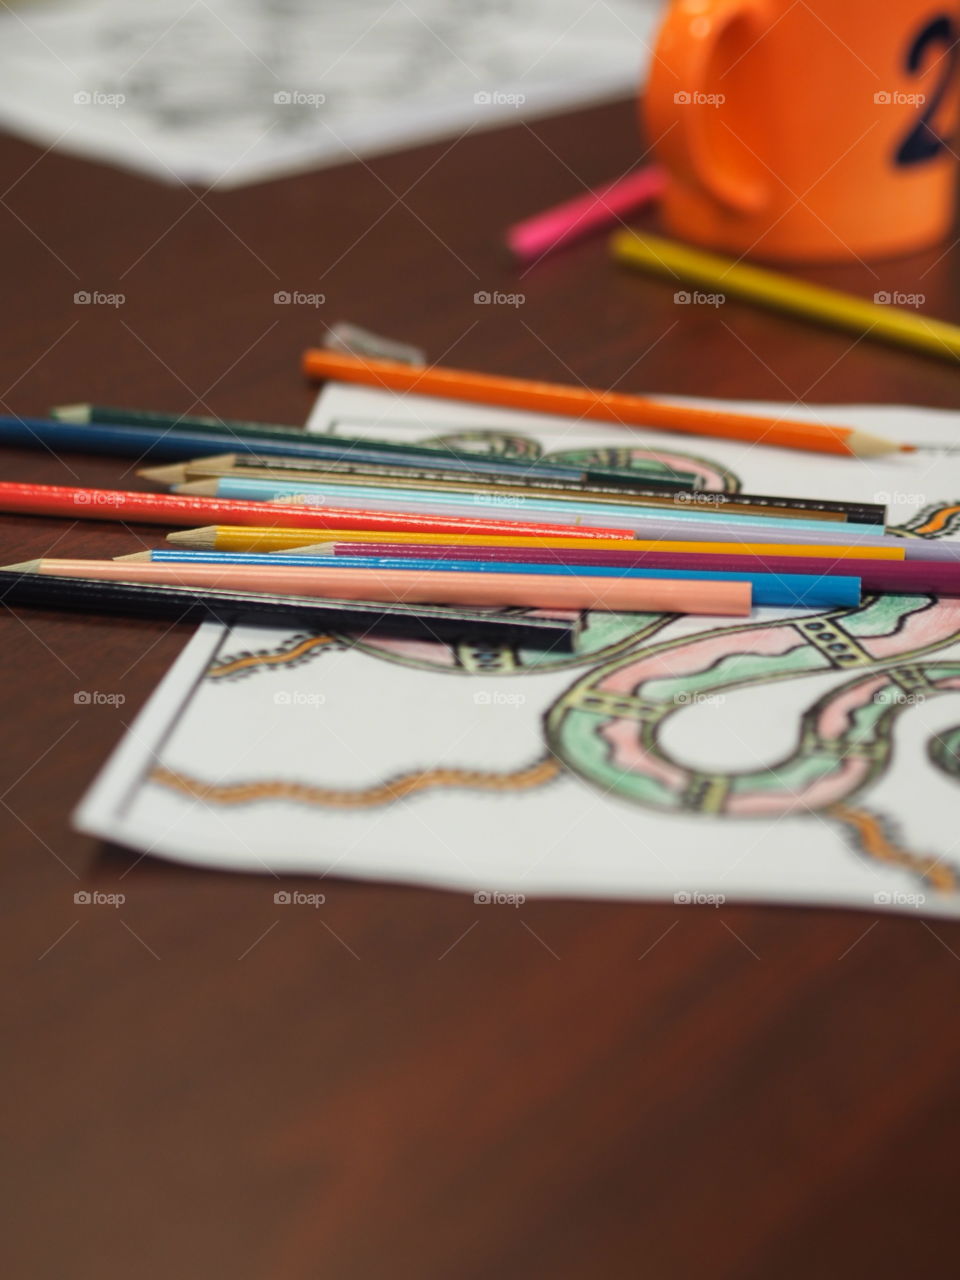 Mindfulness coloring with pencils